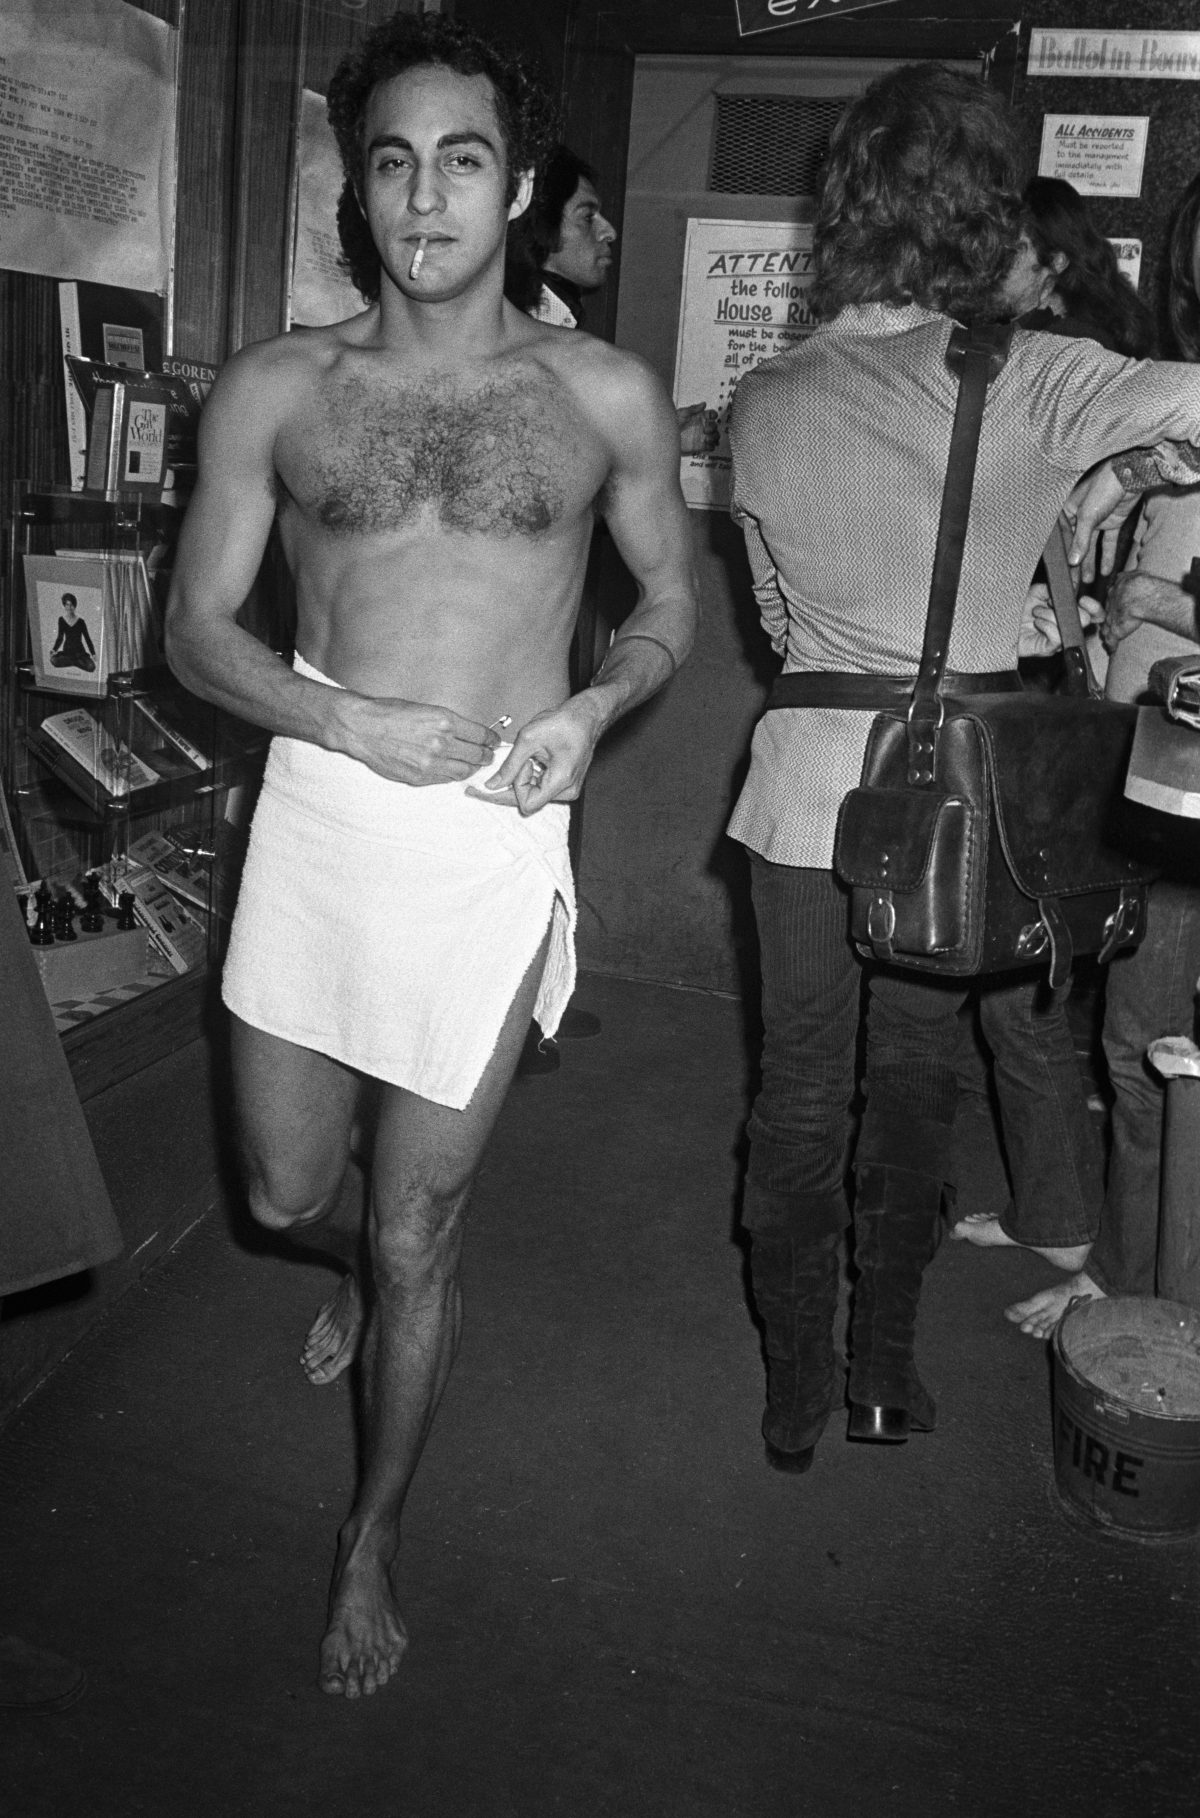 A man wearing only a towel at the Continental Club bath house in New York - 1972